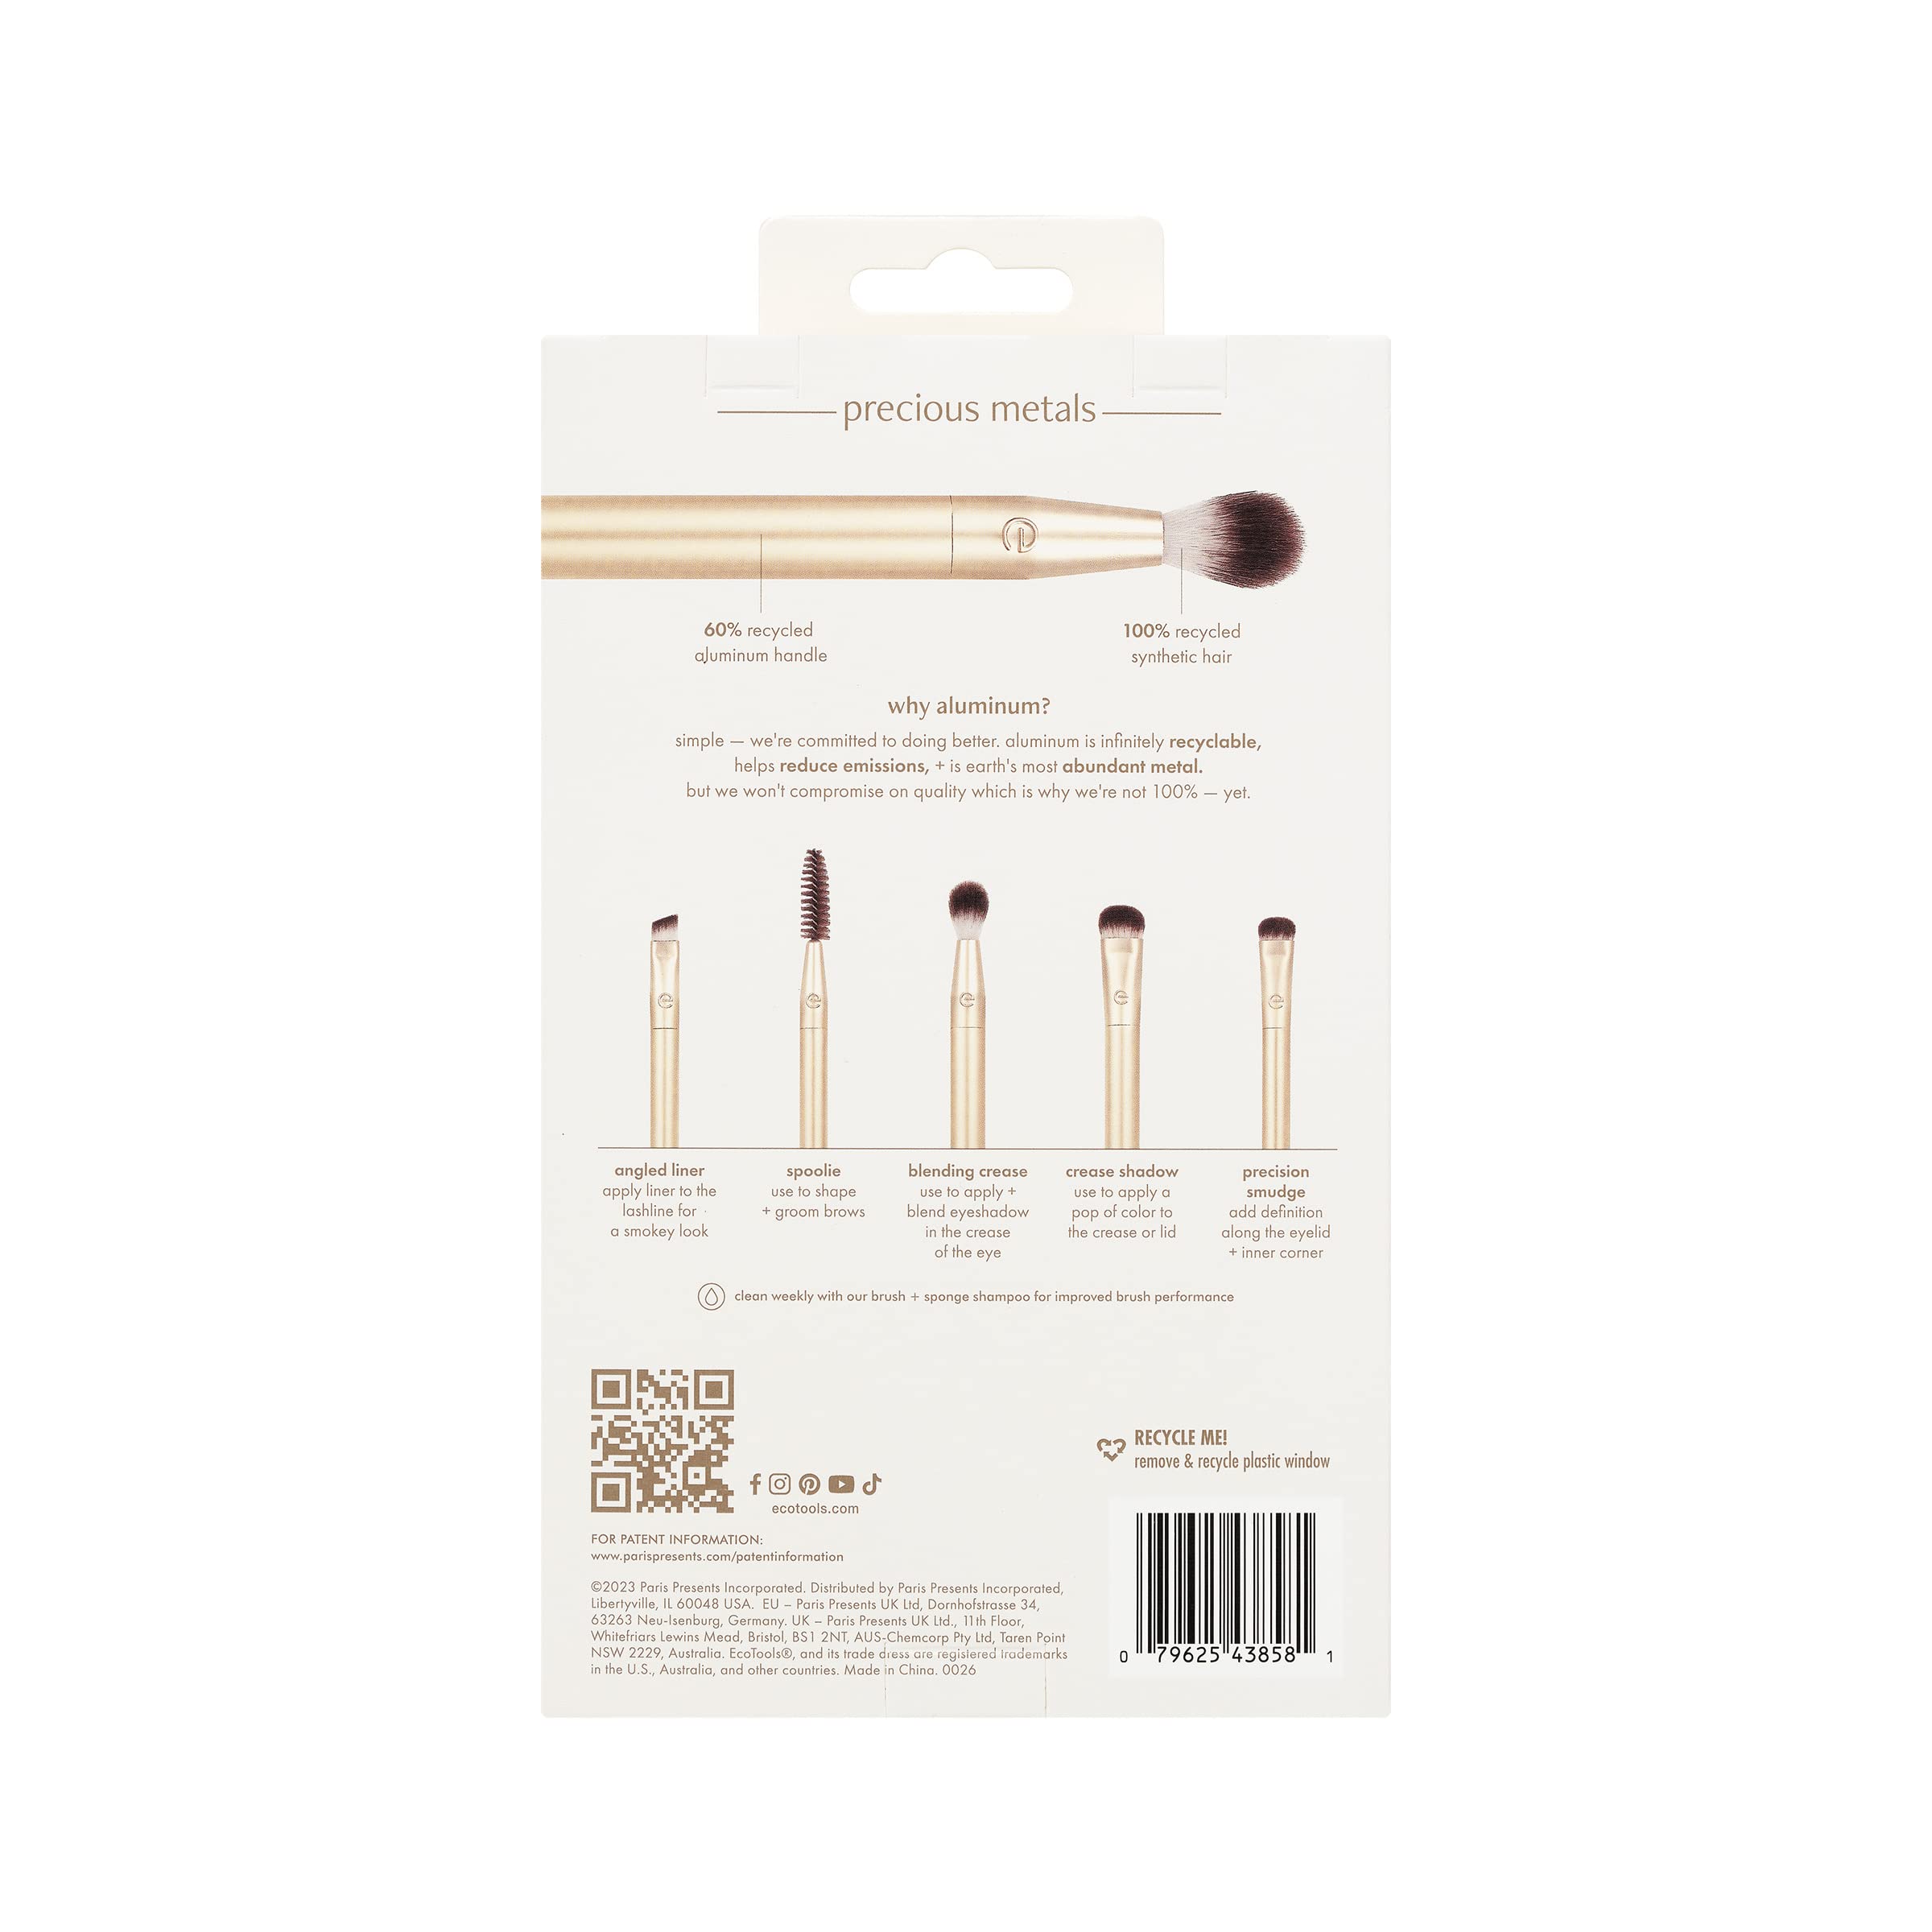 EcoTools Precious Metals Brightening Eye Kit, Precision Makeup Brushes For Eyeshadow, Brows, & Liner, Eco-friendly Makeup Brush Set, Sustainable Recycled Aluminum, Cruelty-Free, Chrome, 5 Piece Set